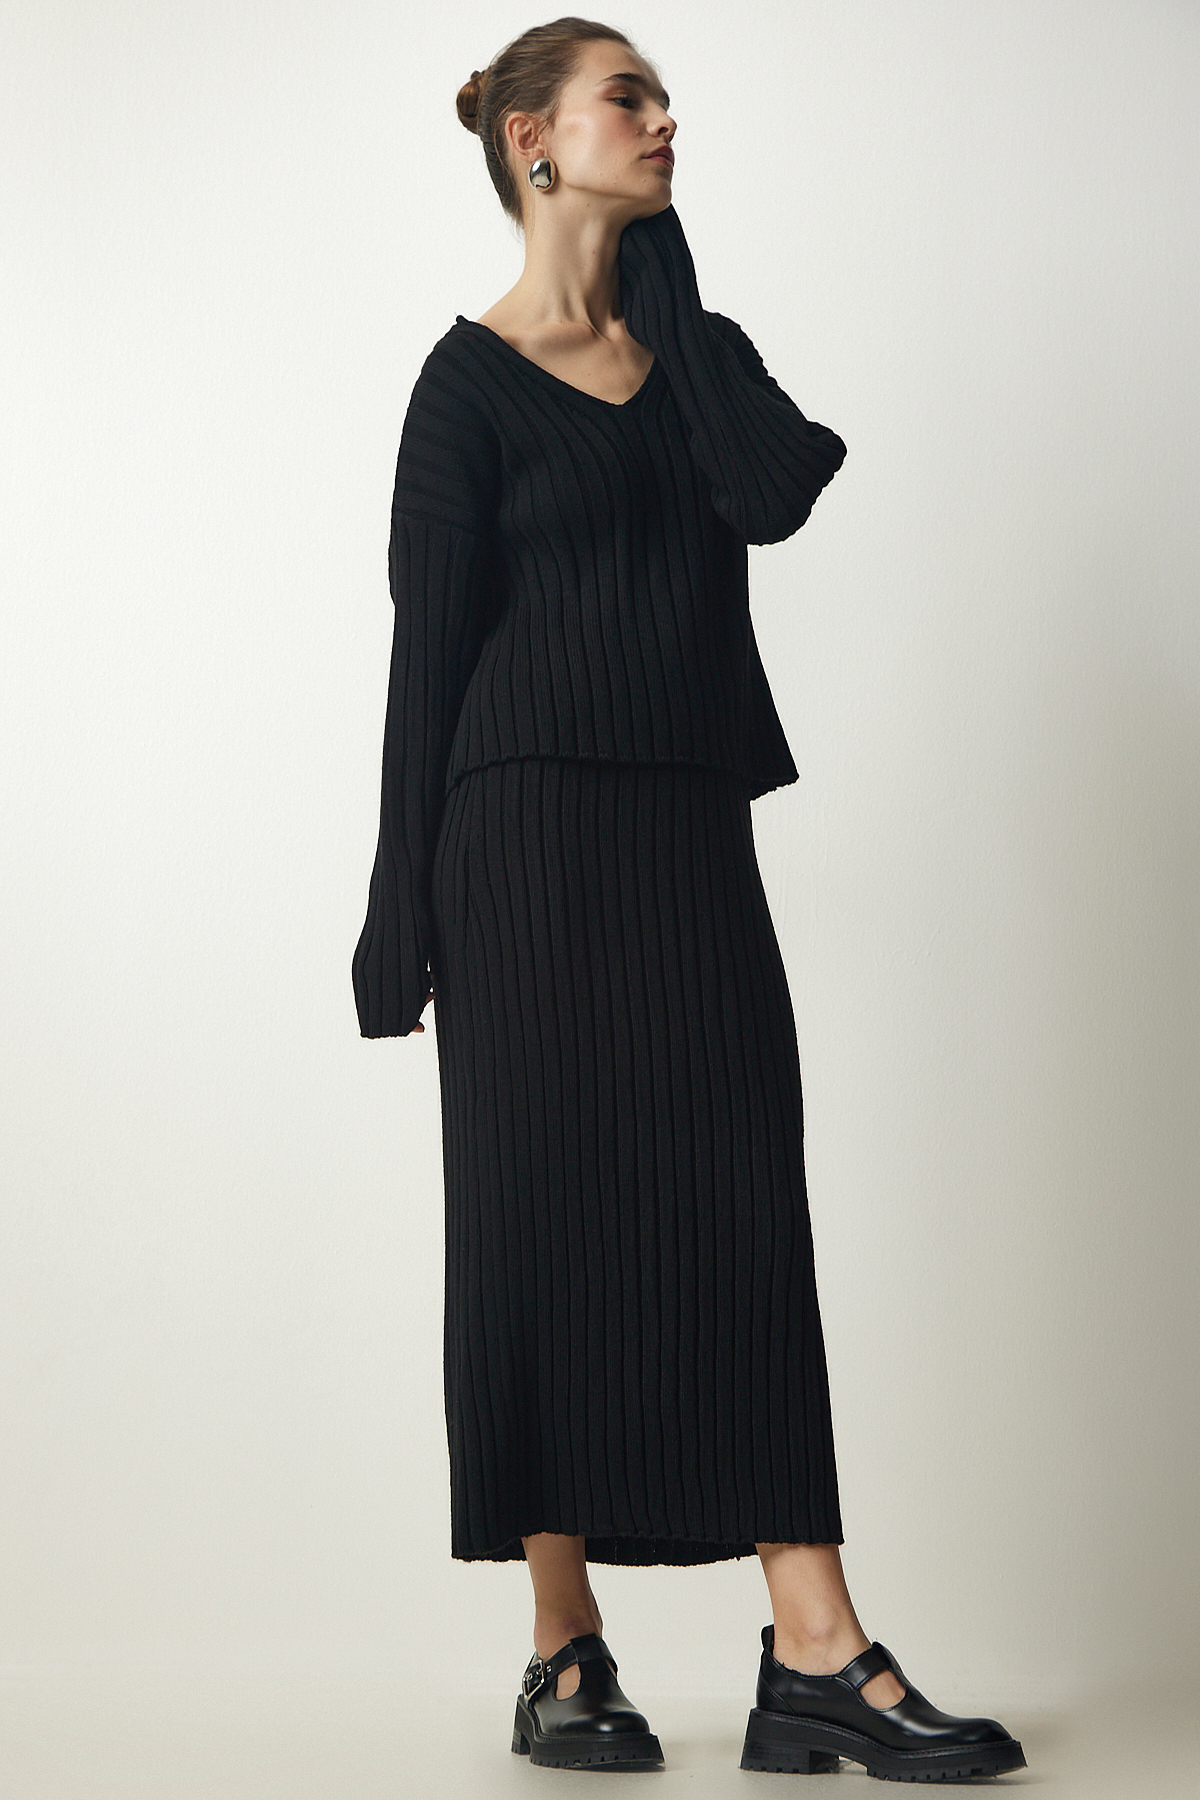 Levně Happiness İstanbul Women's Black Ribbed Sweater Skirt Knitwear Suit